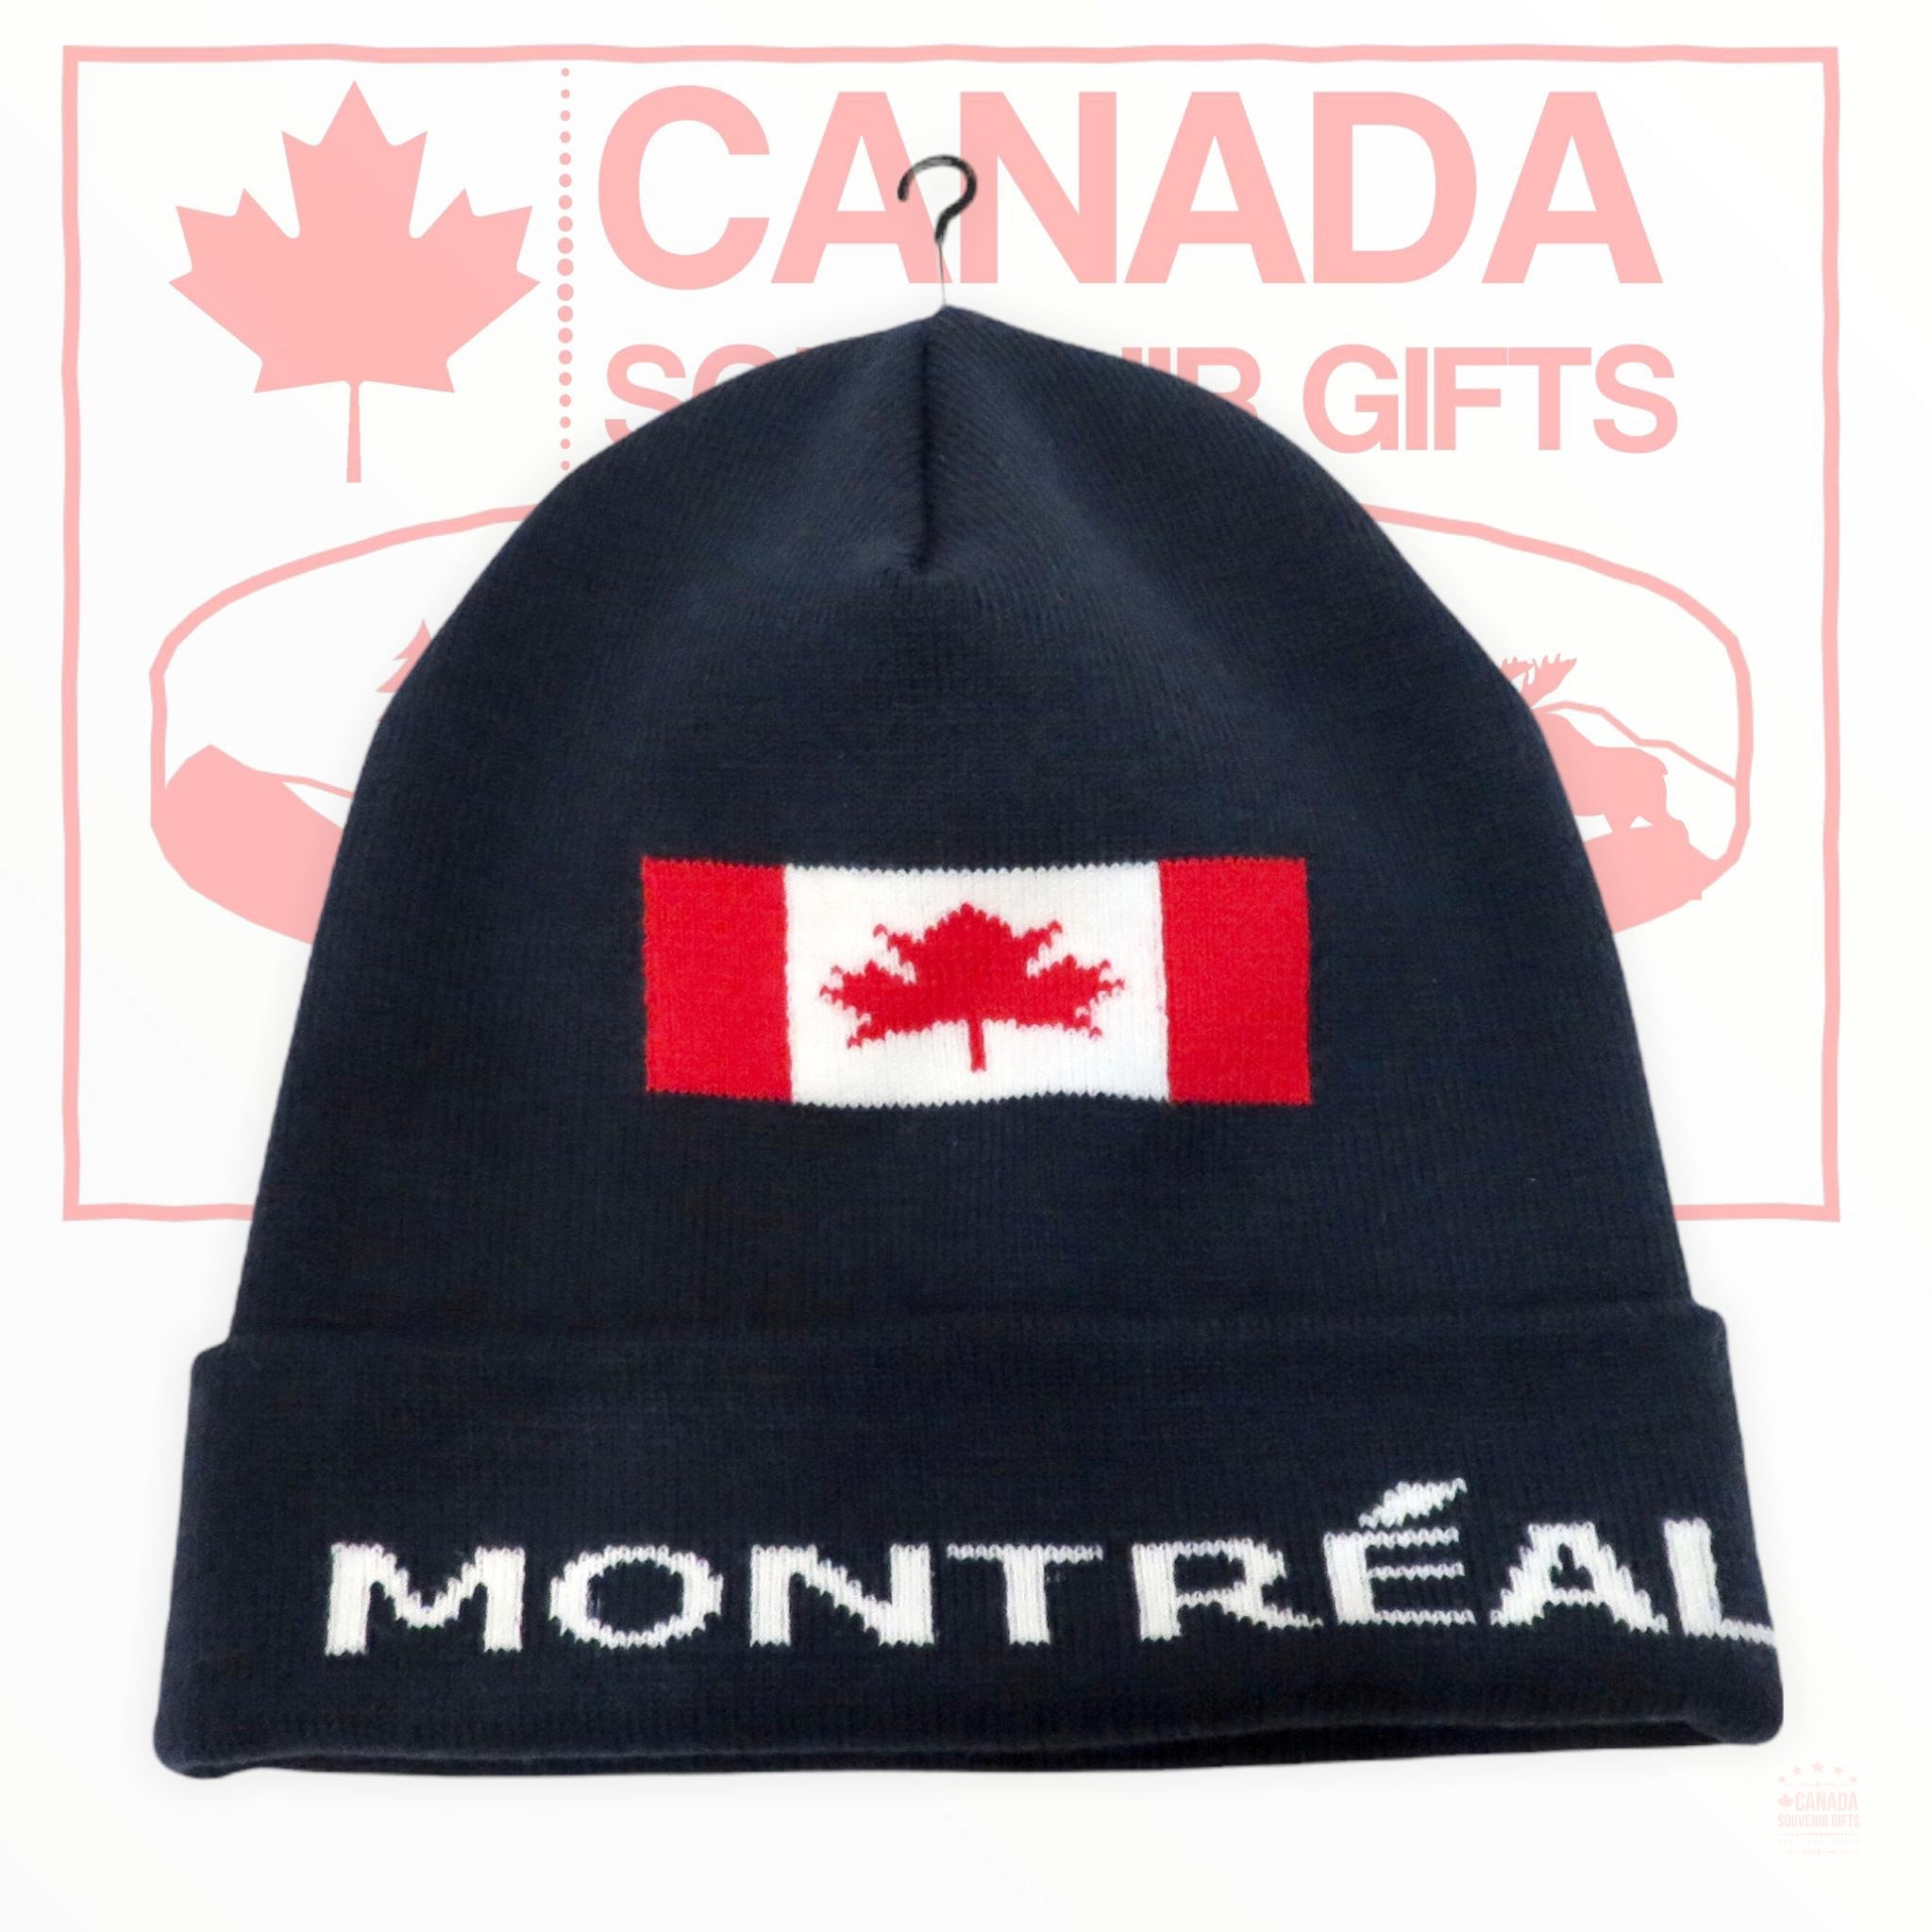 Montreal Winter Toque Hat with Canada Country Flag - Navy or Charcoal SuperFine Quality